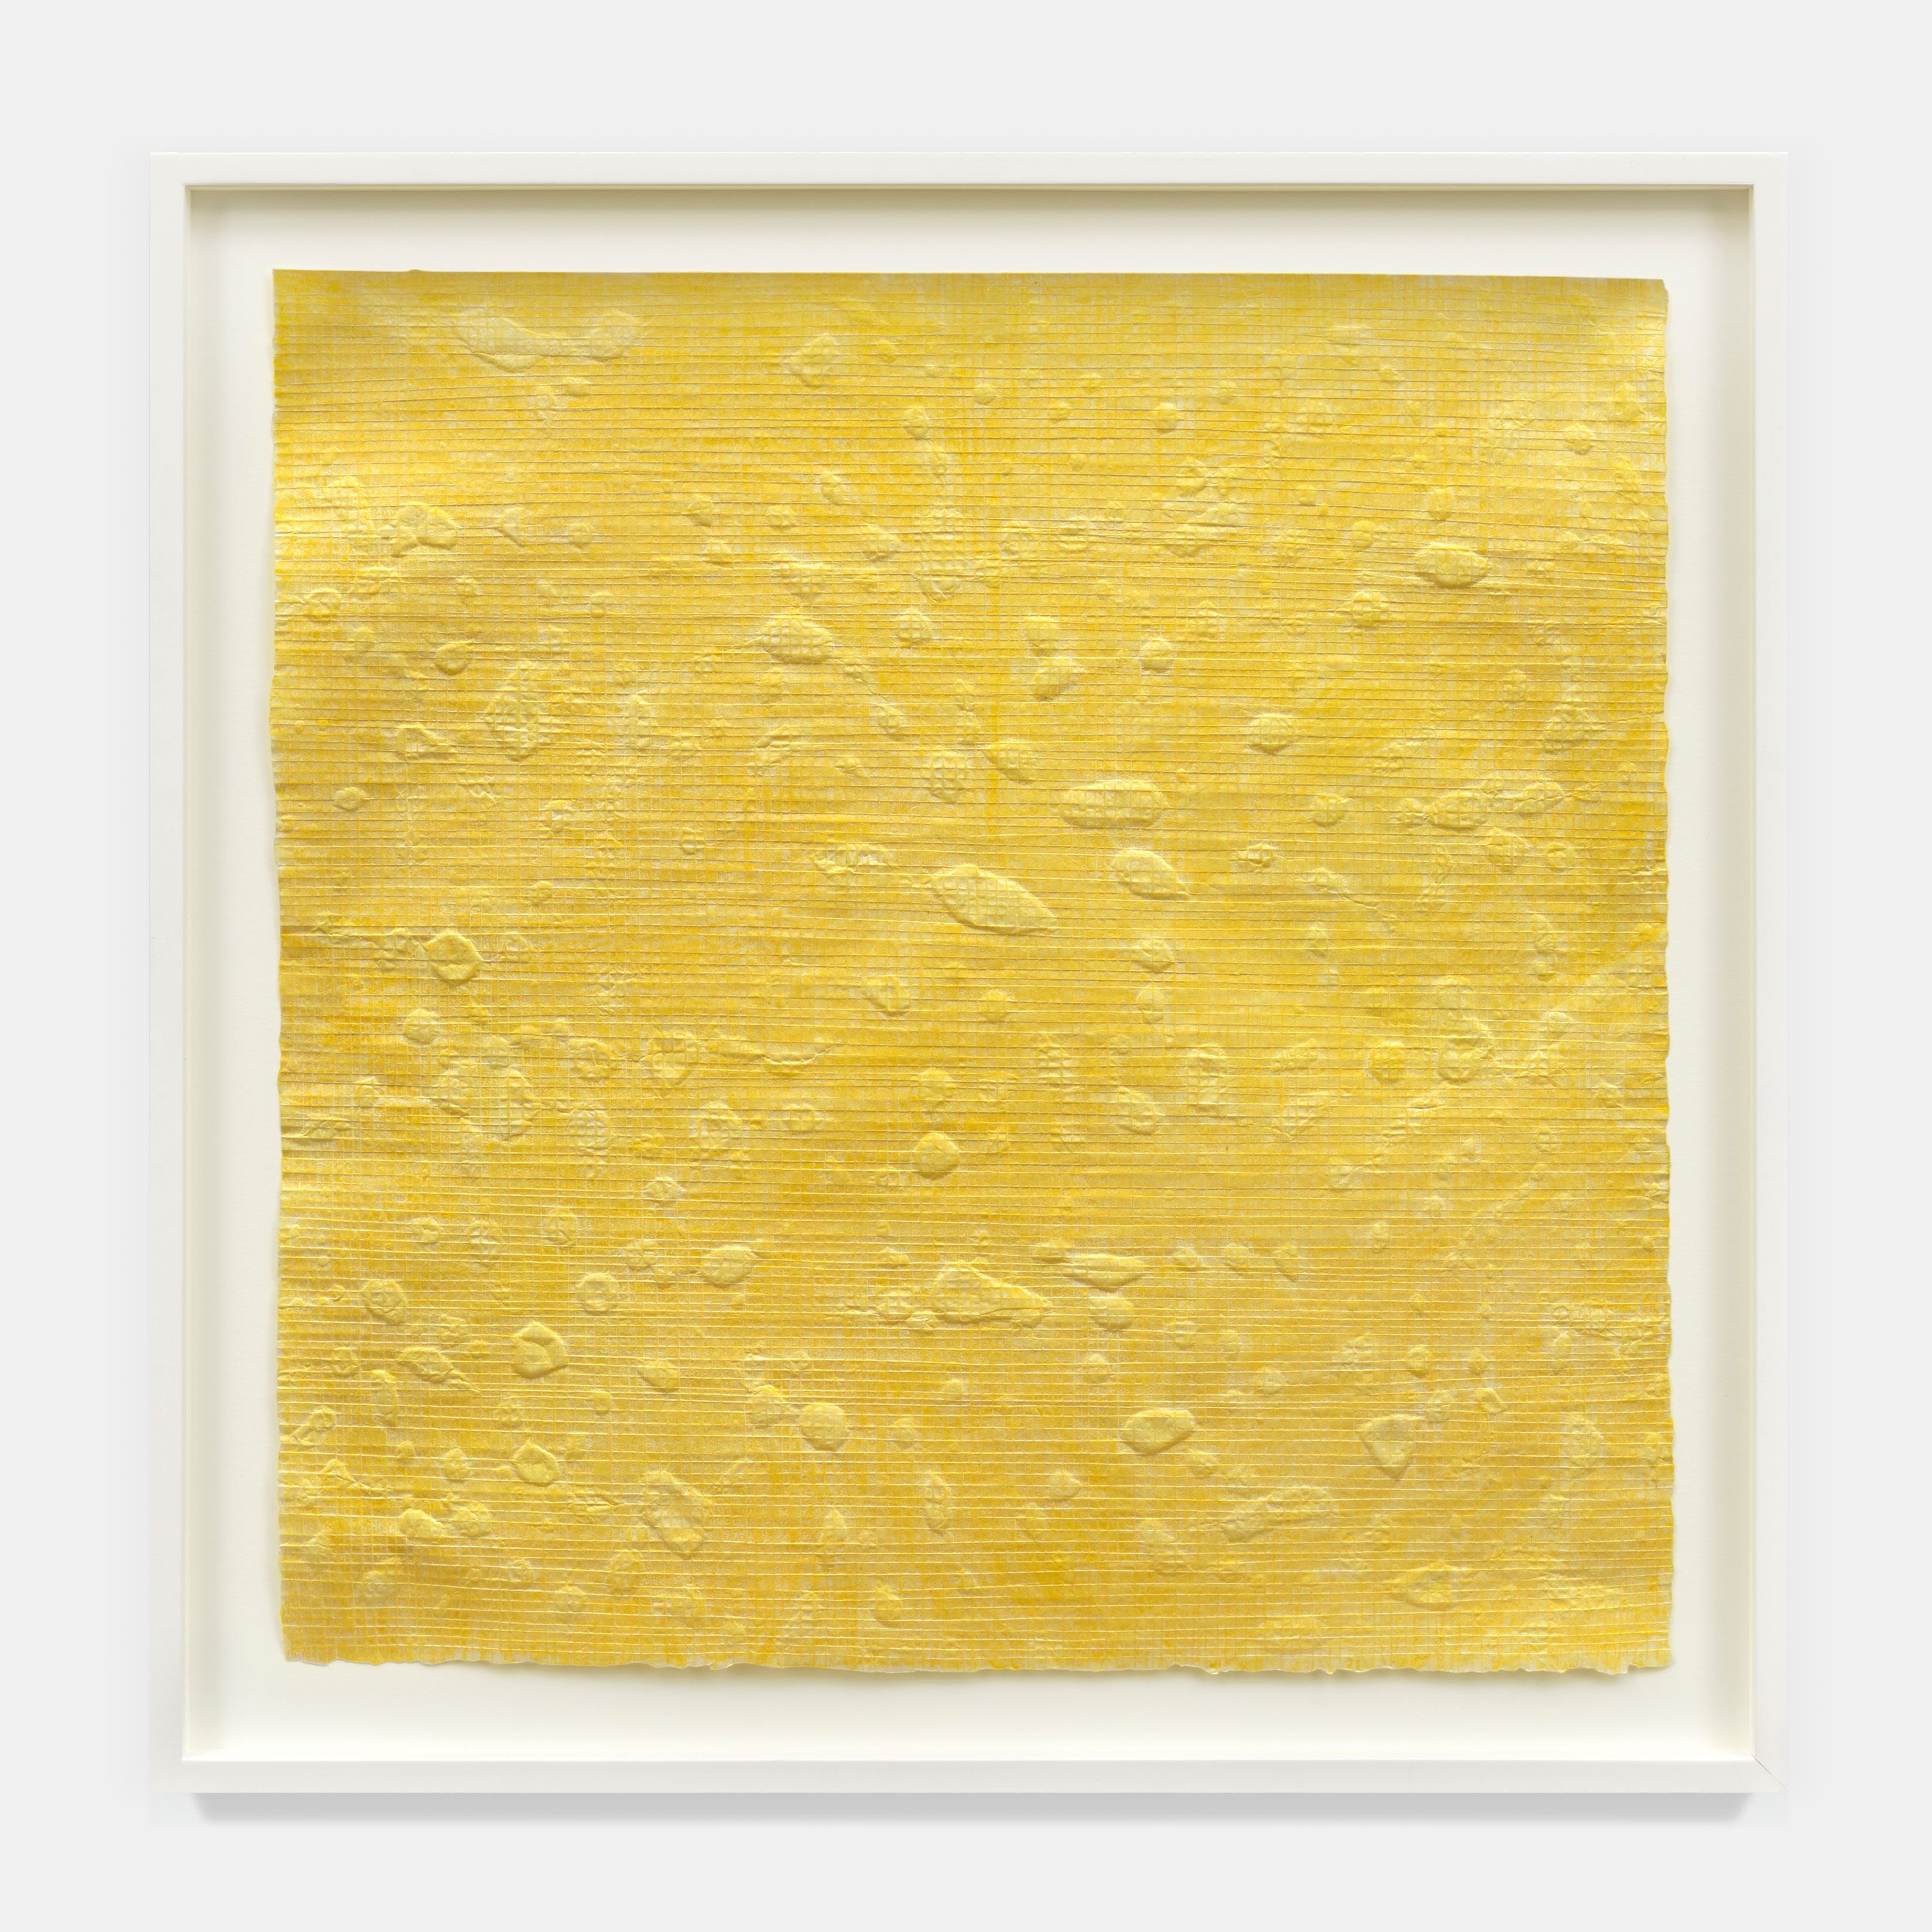 Eleanore Mikus's Untitled crayon on folded abaca paper work